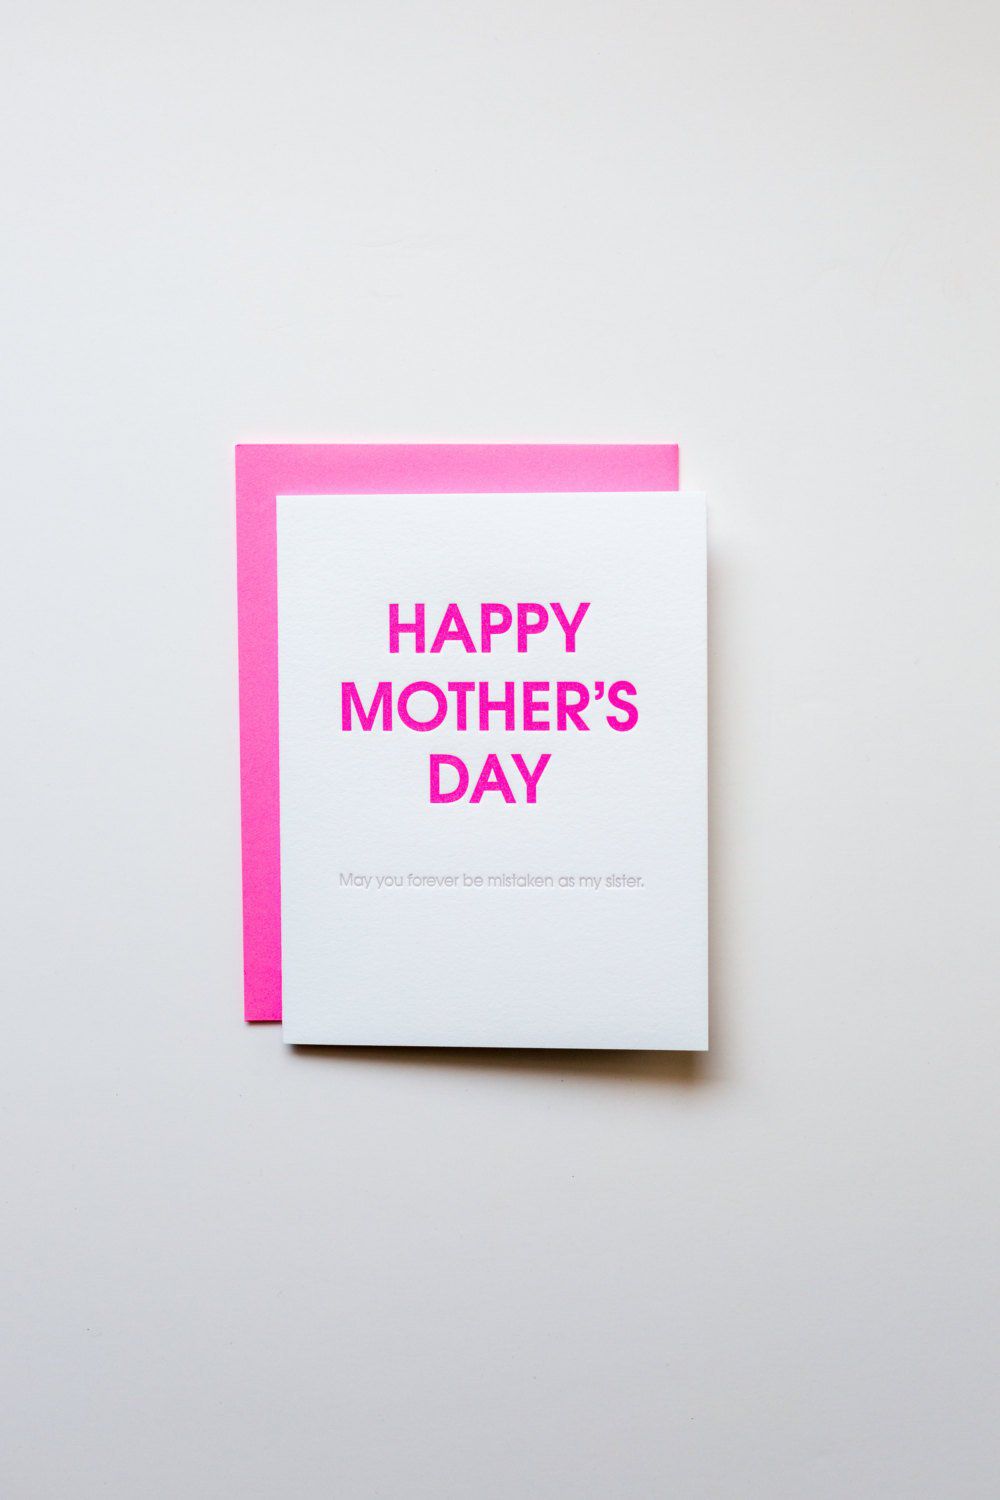 mother's day card says may you forever be mistaken as my sister